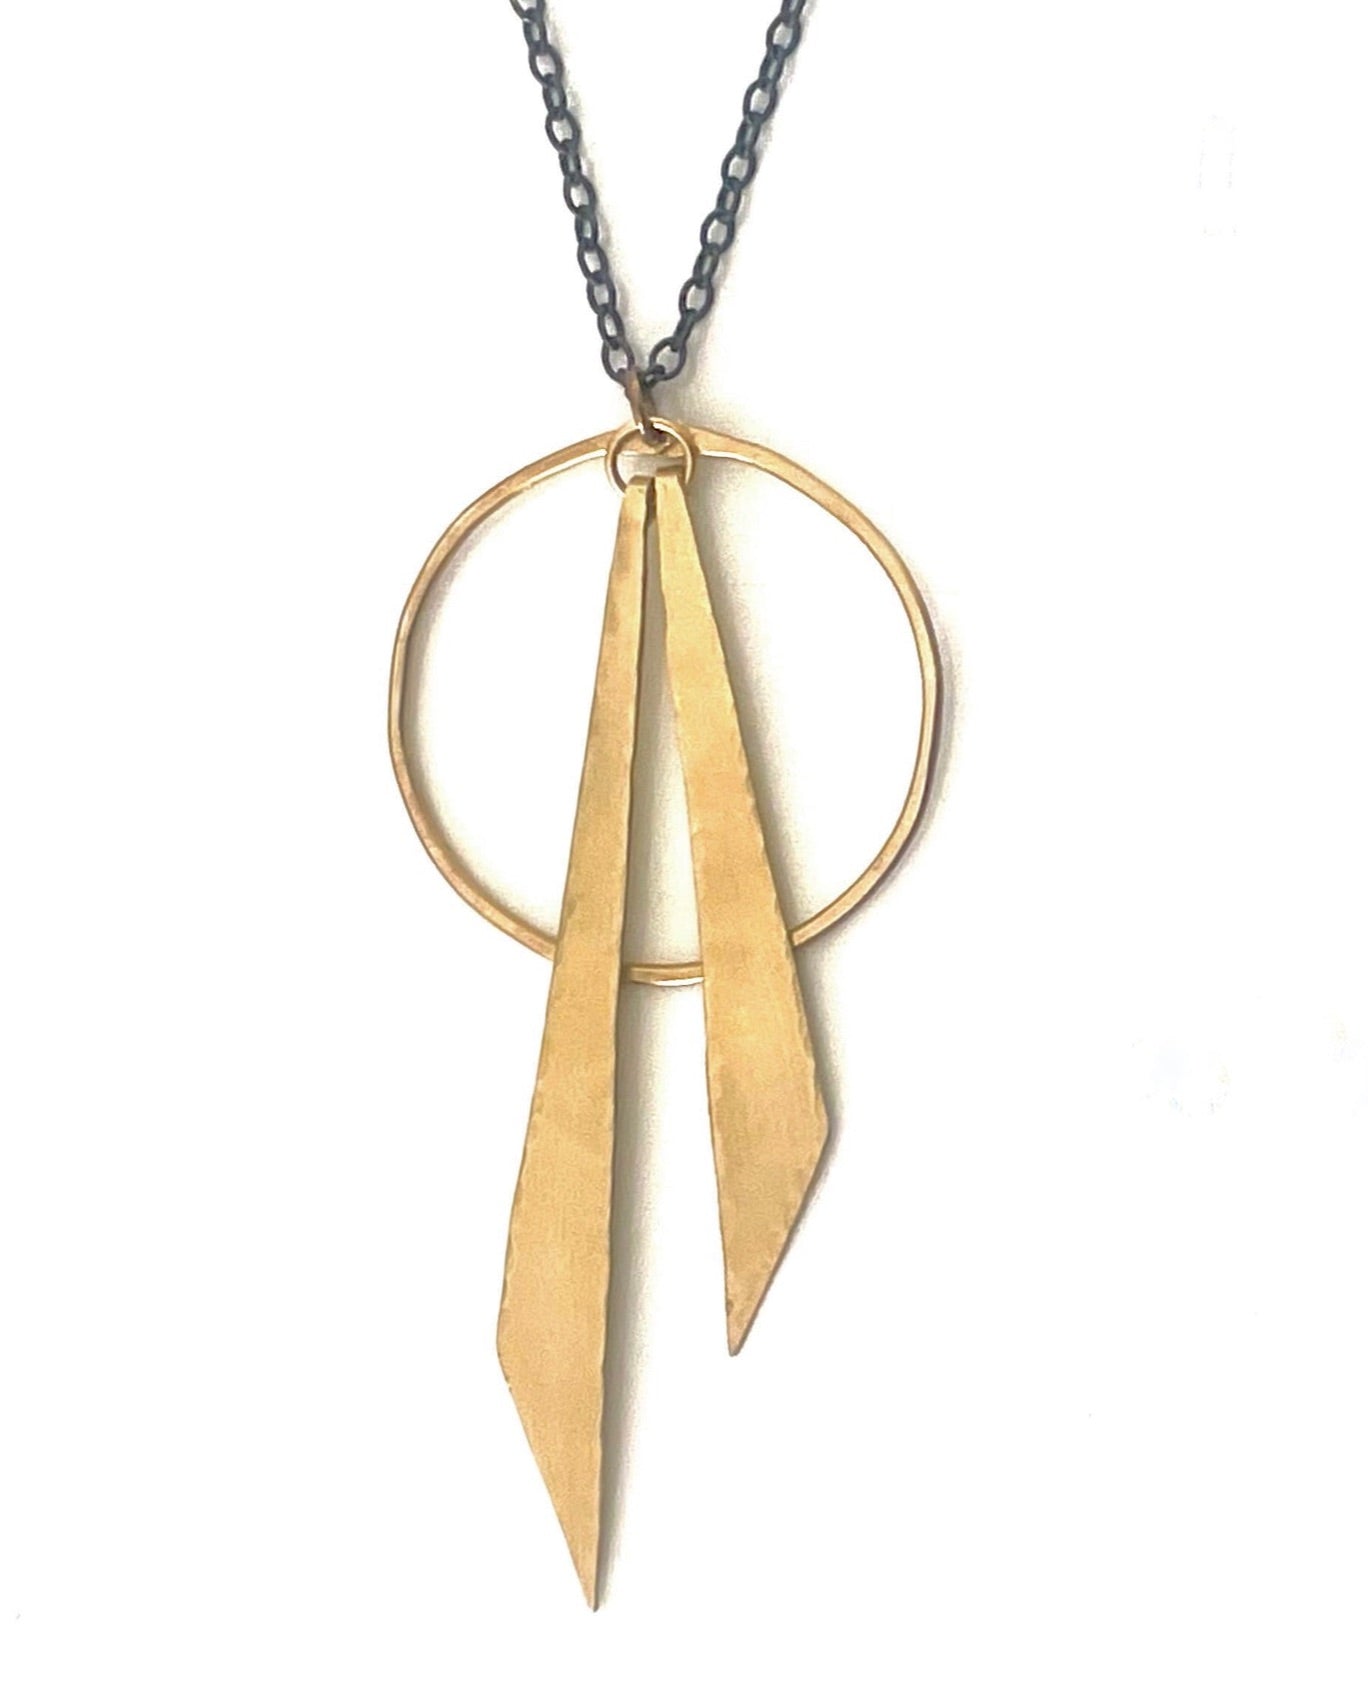 Circle and Slender Triangle Necklace